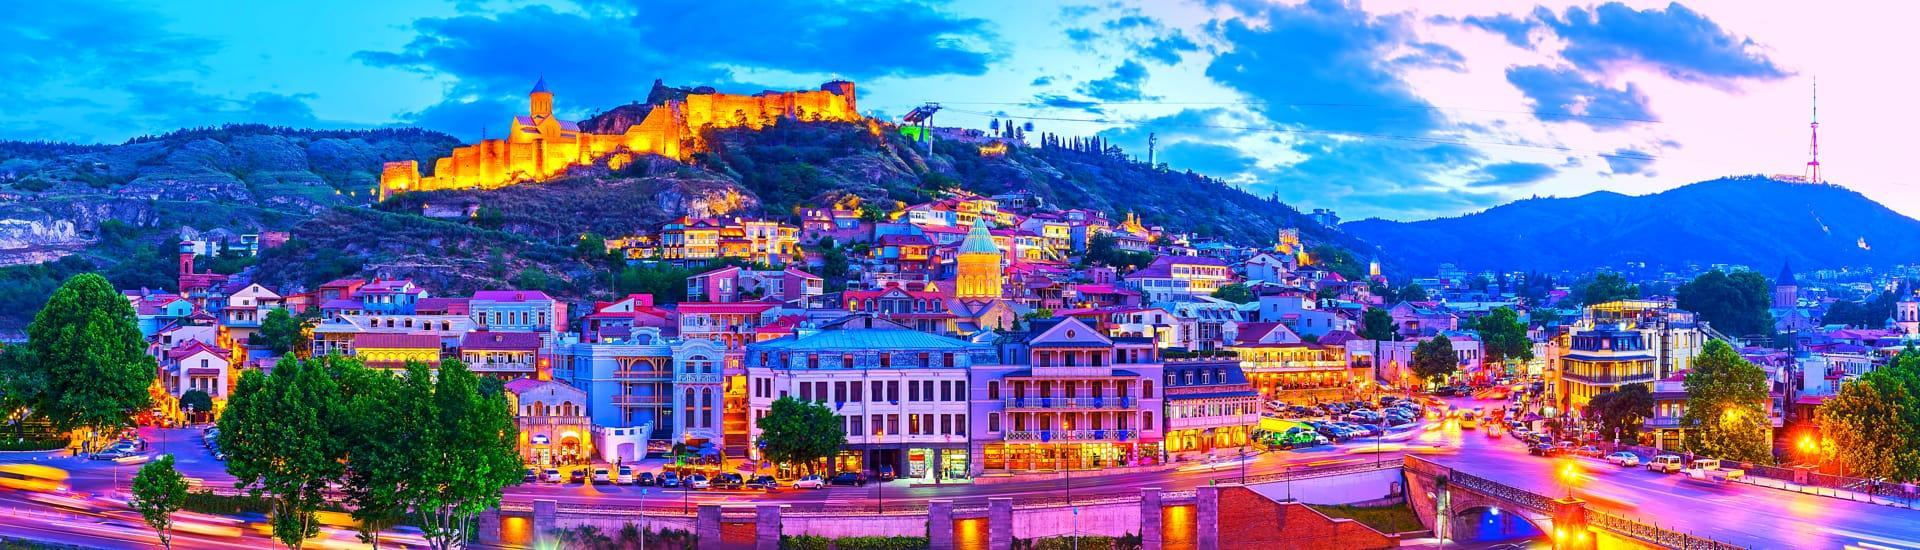 Find the Best HotelsS in Tbilisi City